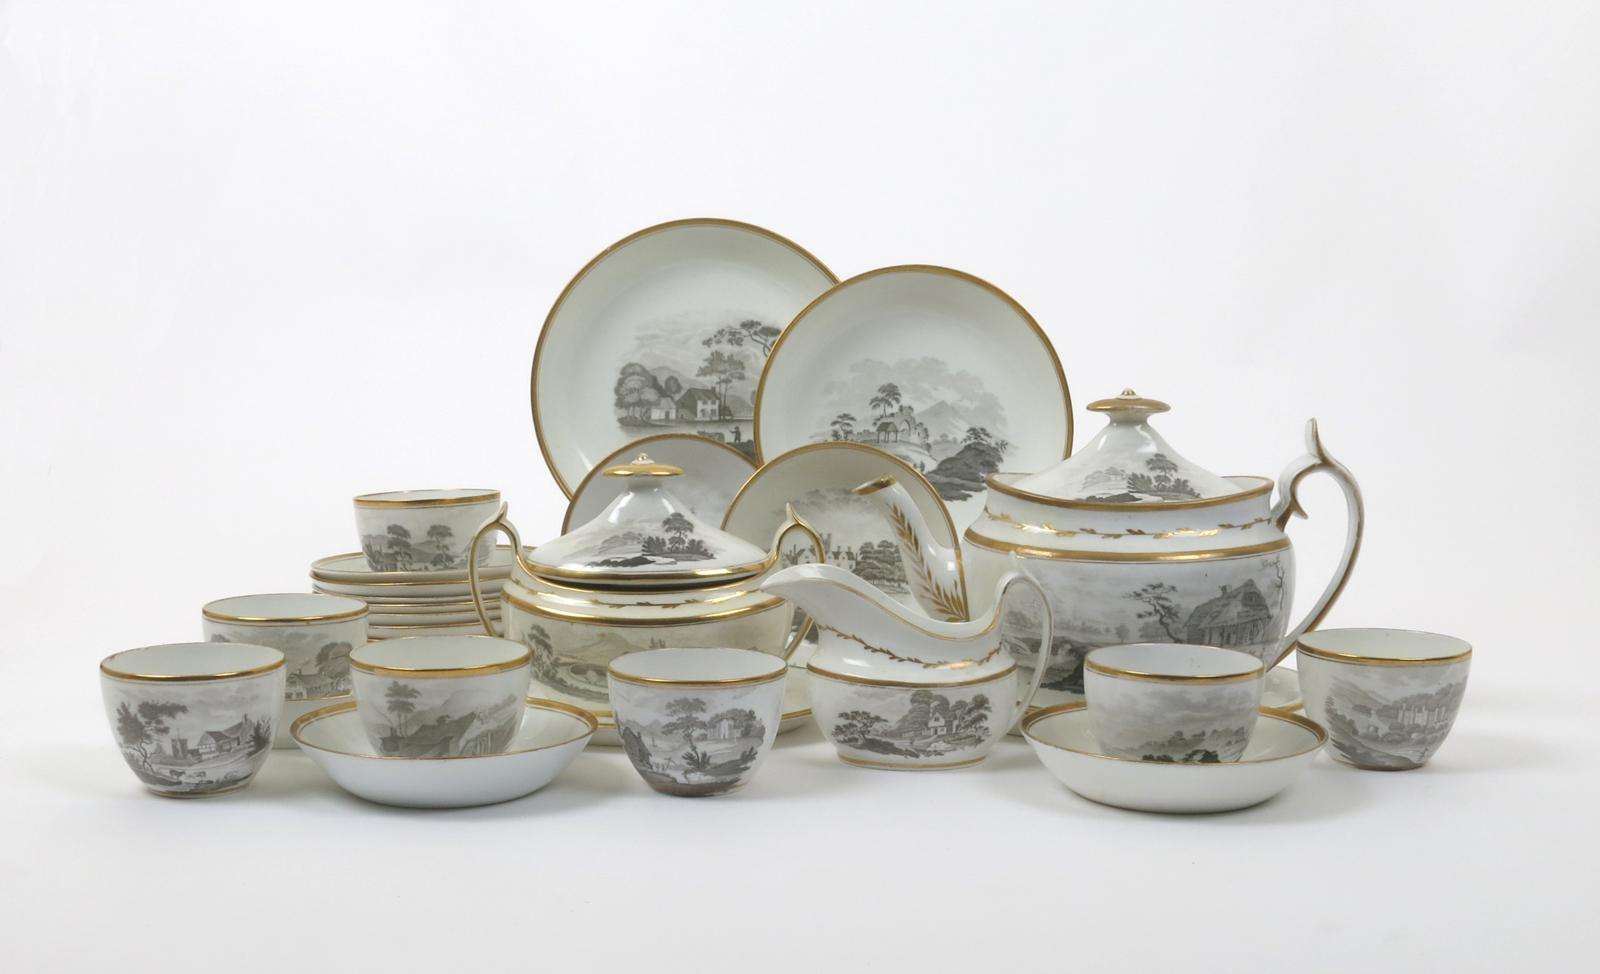 A Spode part tea service  c.1805-10, bat-printed in pattern 557 with pastoral scenes of villagers